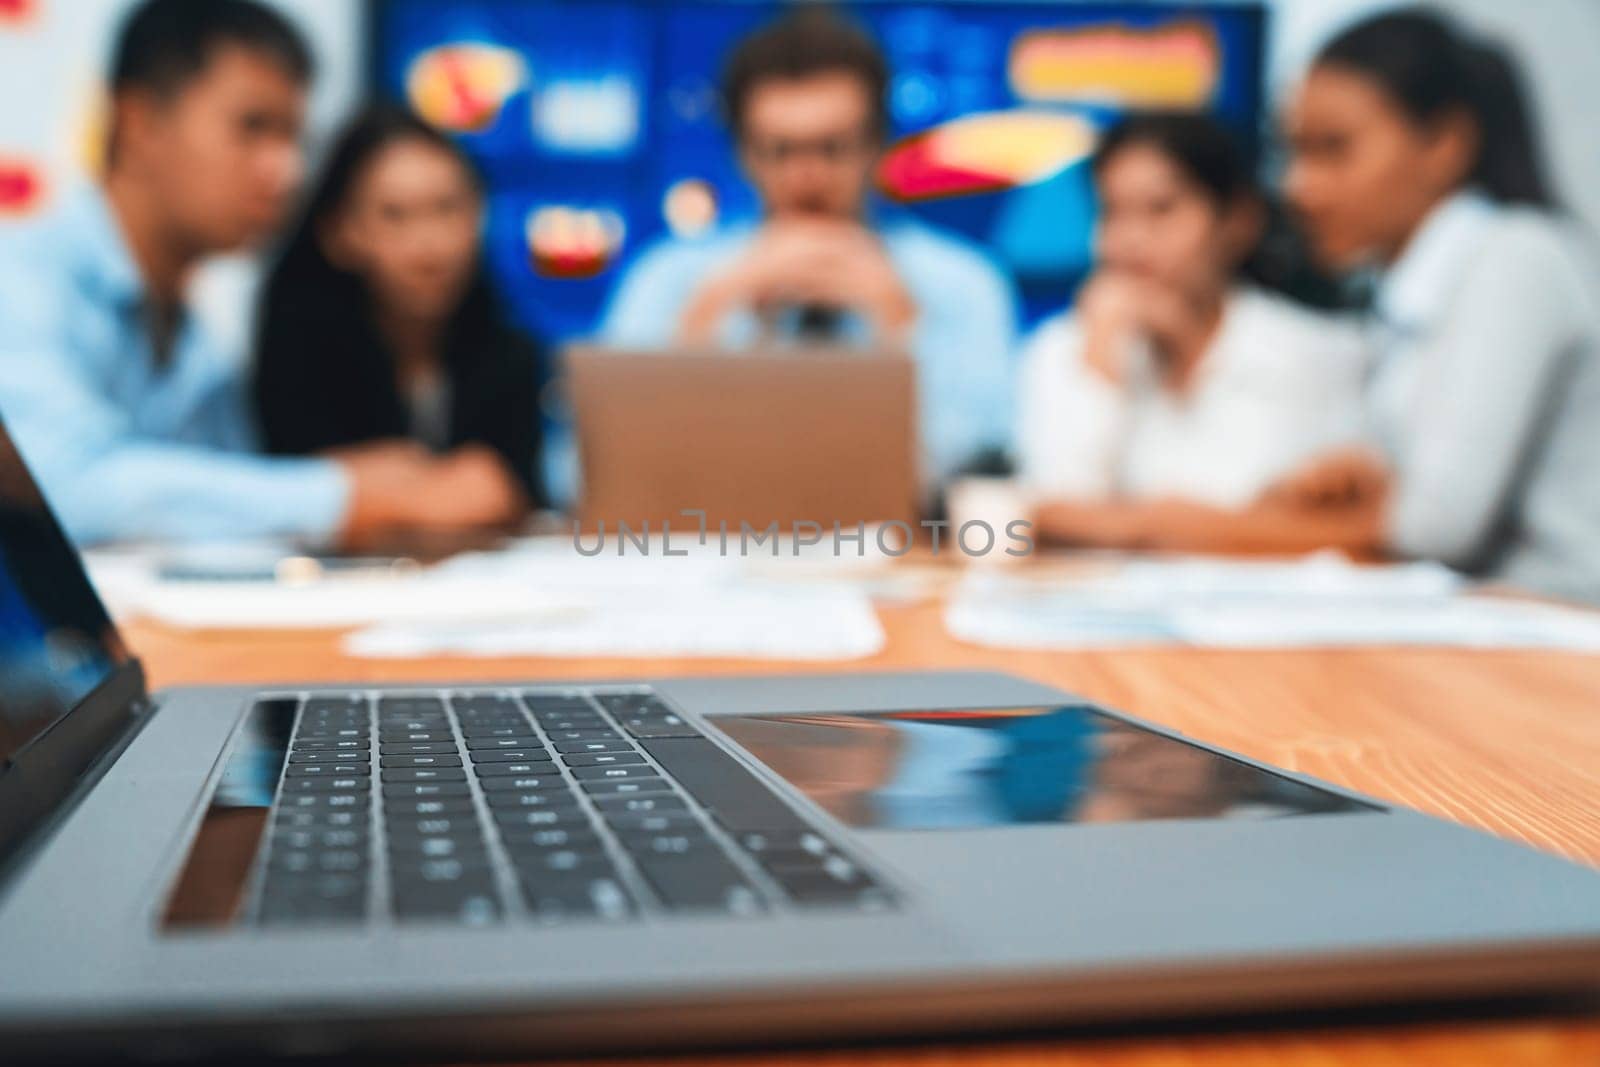 Closeup focused laptop with blurred background of business people using laptop computer to analyze financial data or data analysis display on screen background. Meticulous